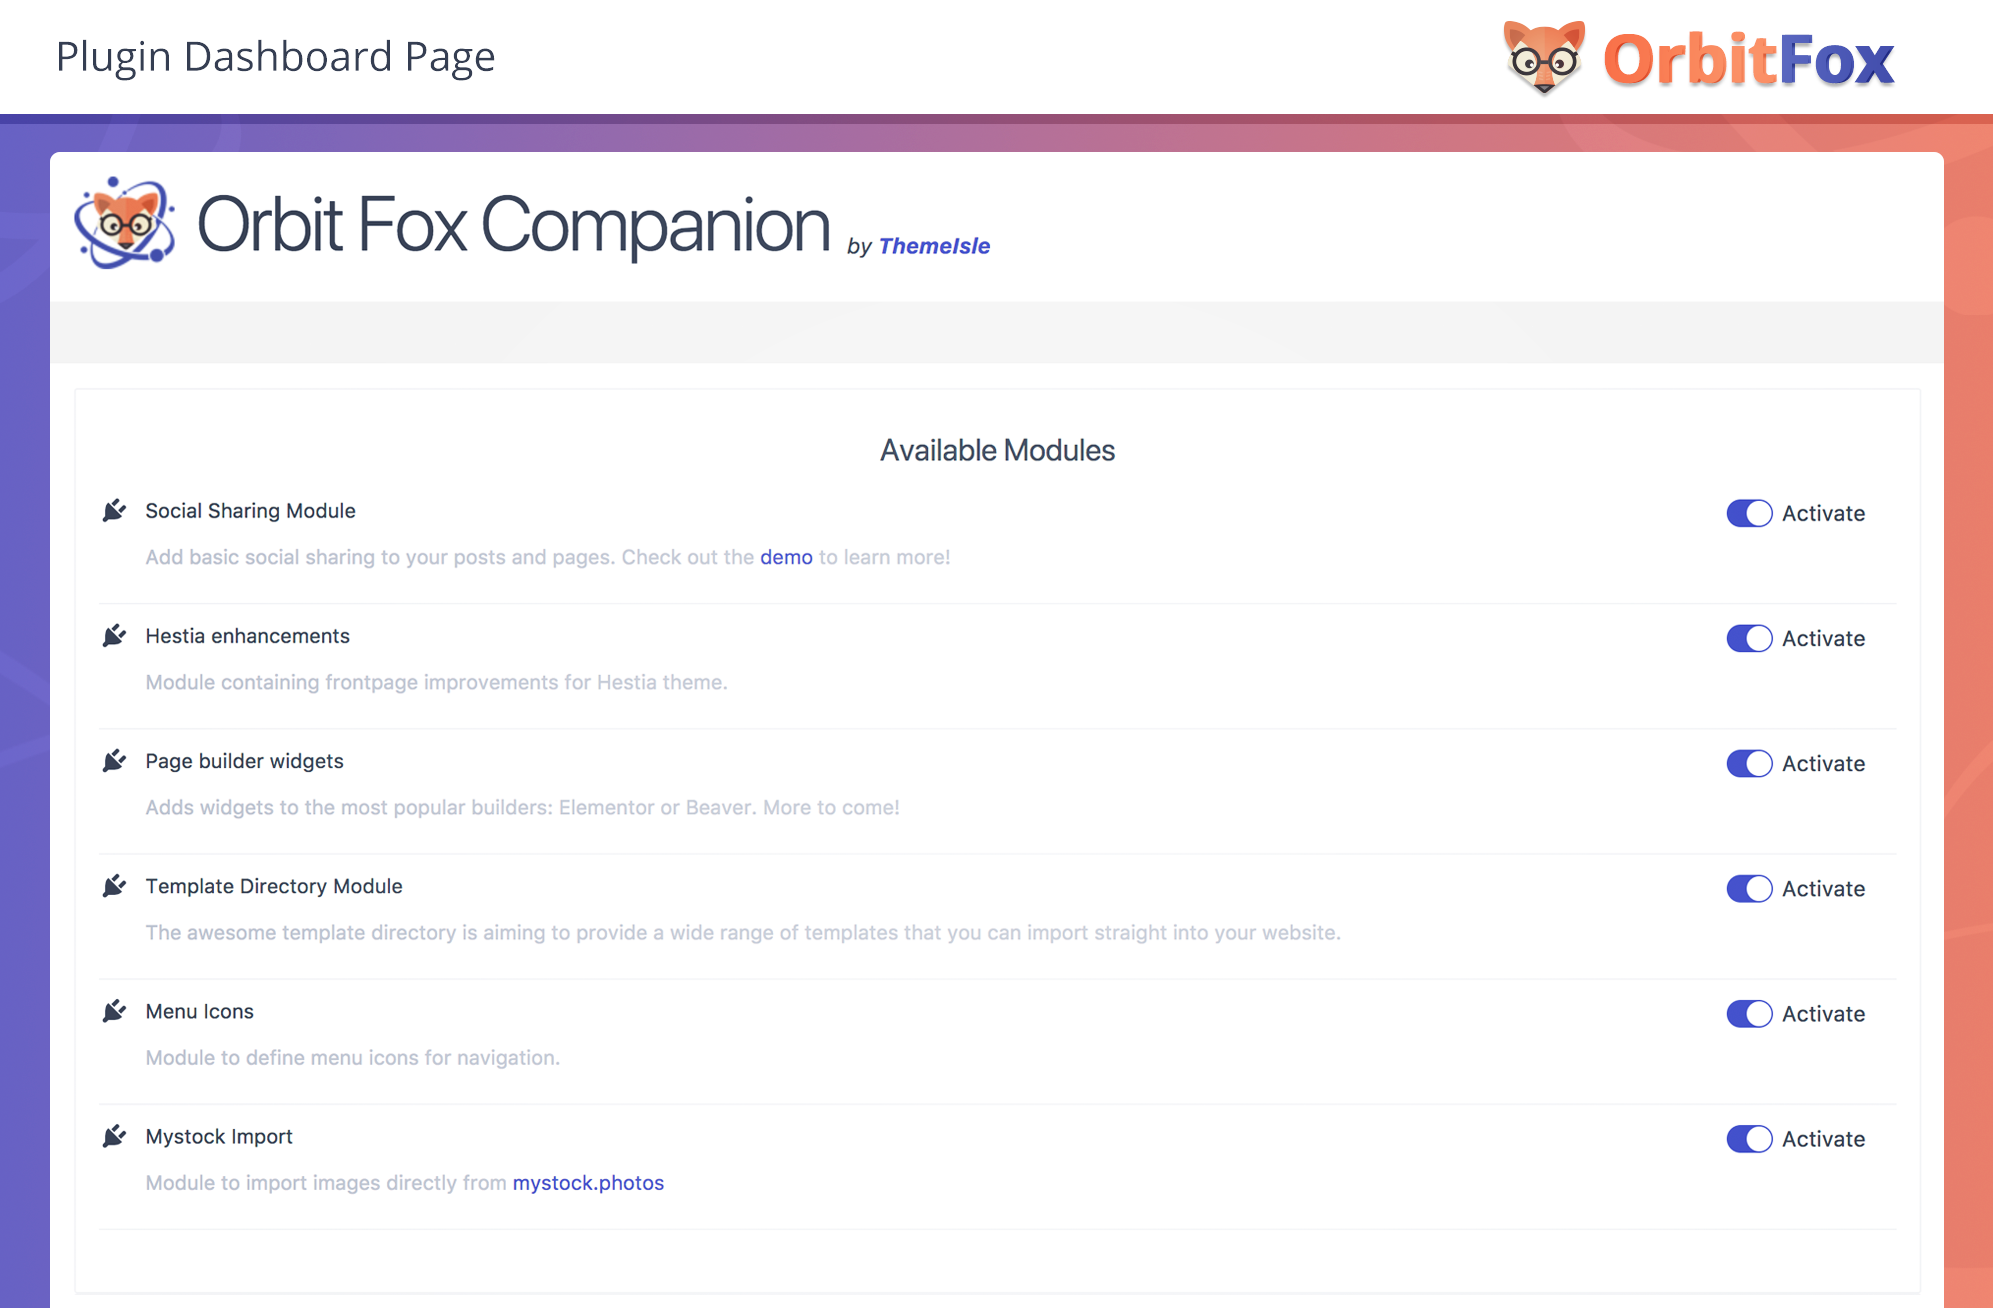 The OrbitFox Dashboard Page